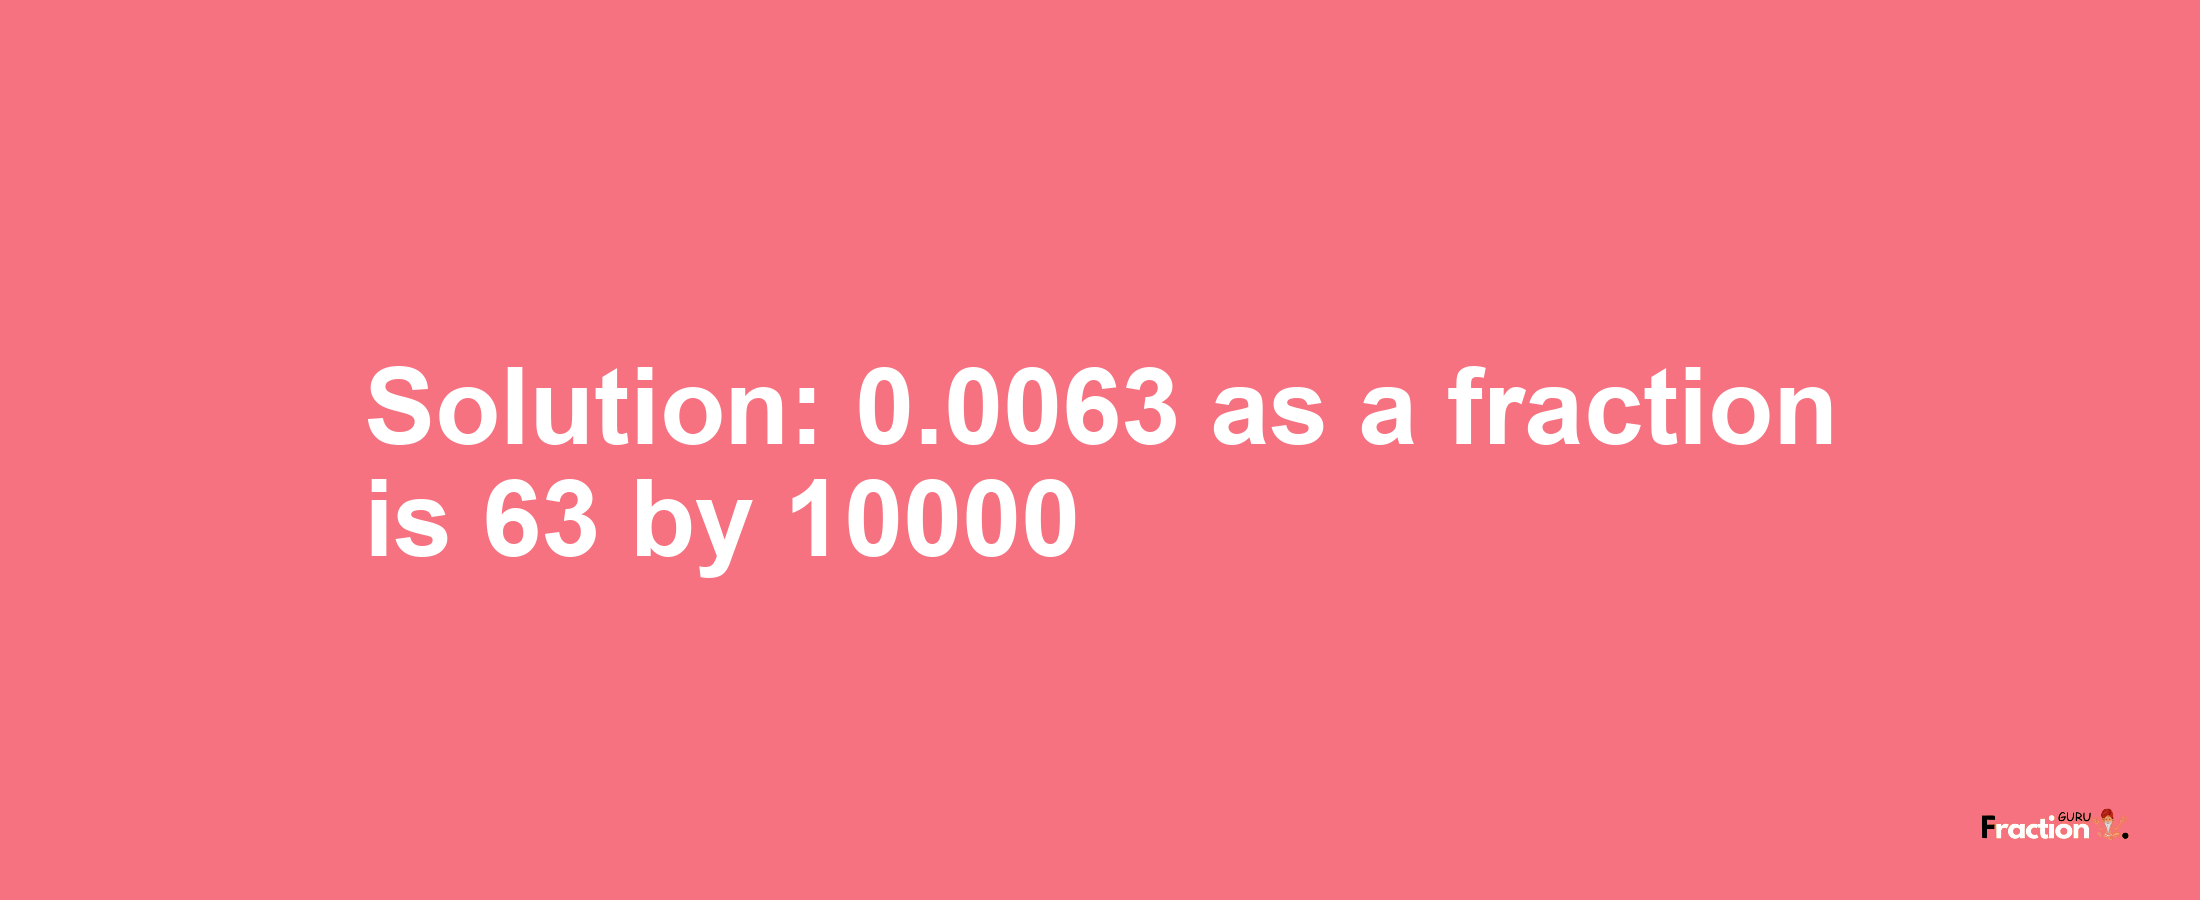 Solution:0.0063 as a fraction is 63/10000